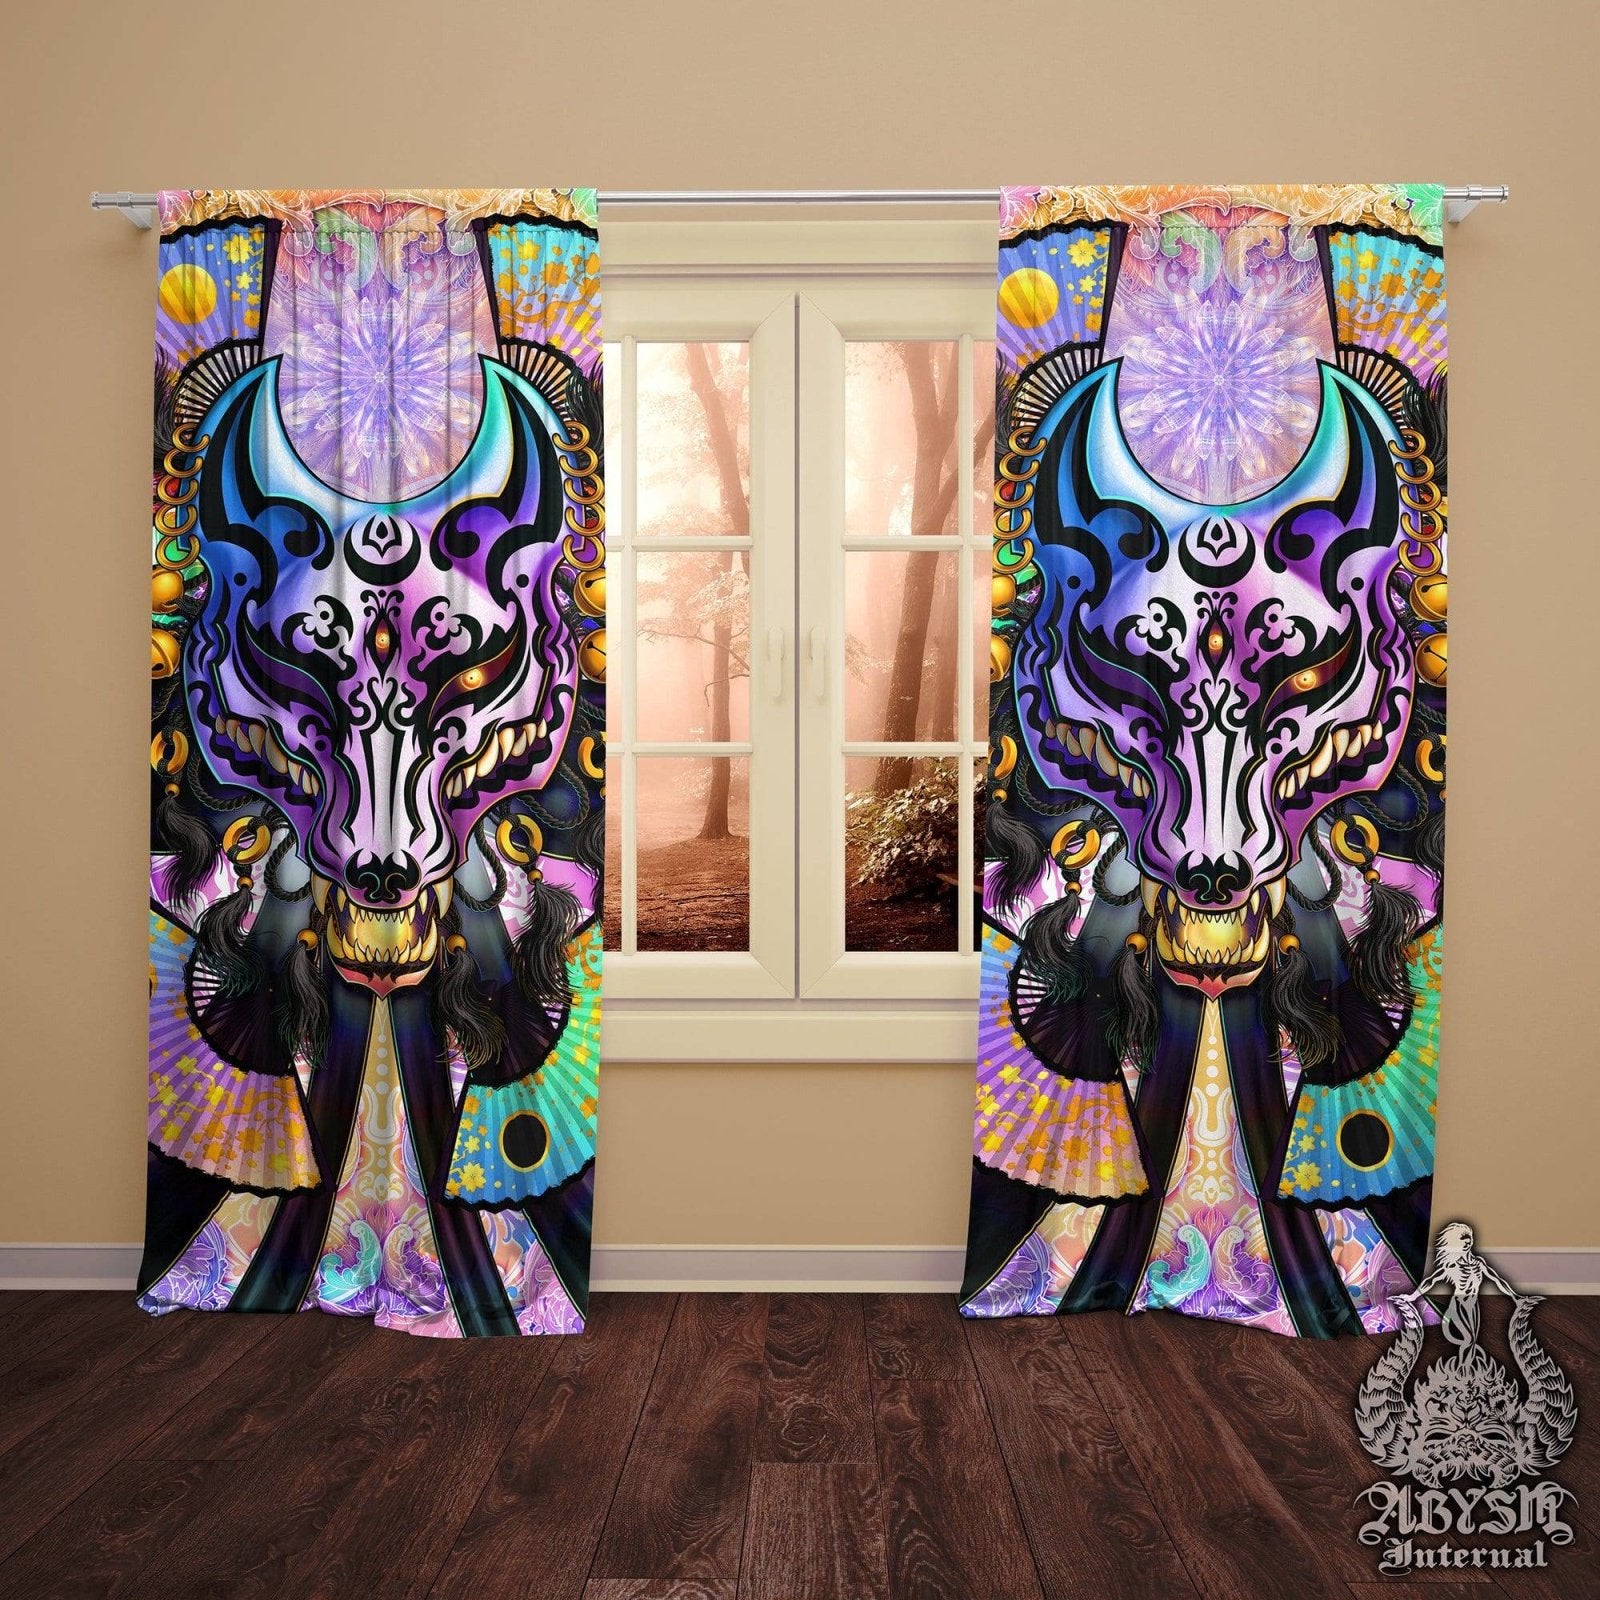 Anime Blackout Curtains, Long Window Panels, Holographic Room Decor, Okami Art Print, Funky and Eclectic Home Decor - Pastel Punk Kitsune, Black Fox Mask - Abysm Internal